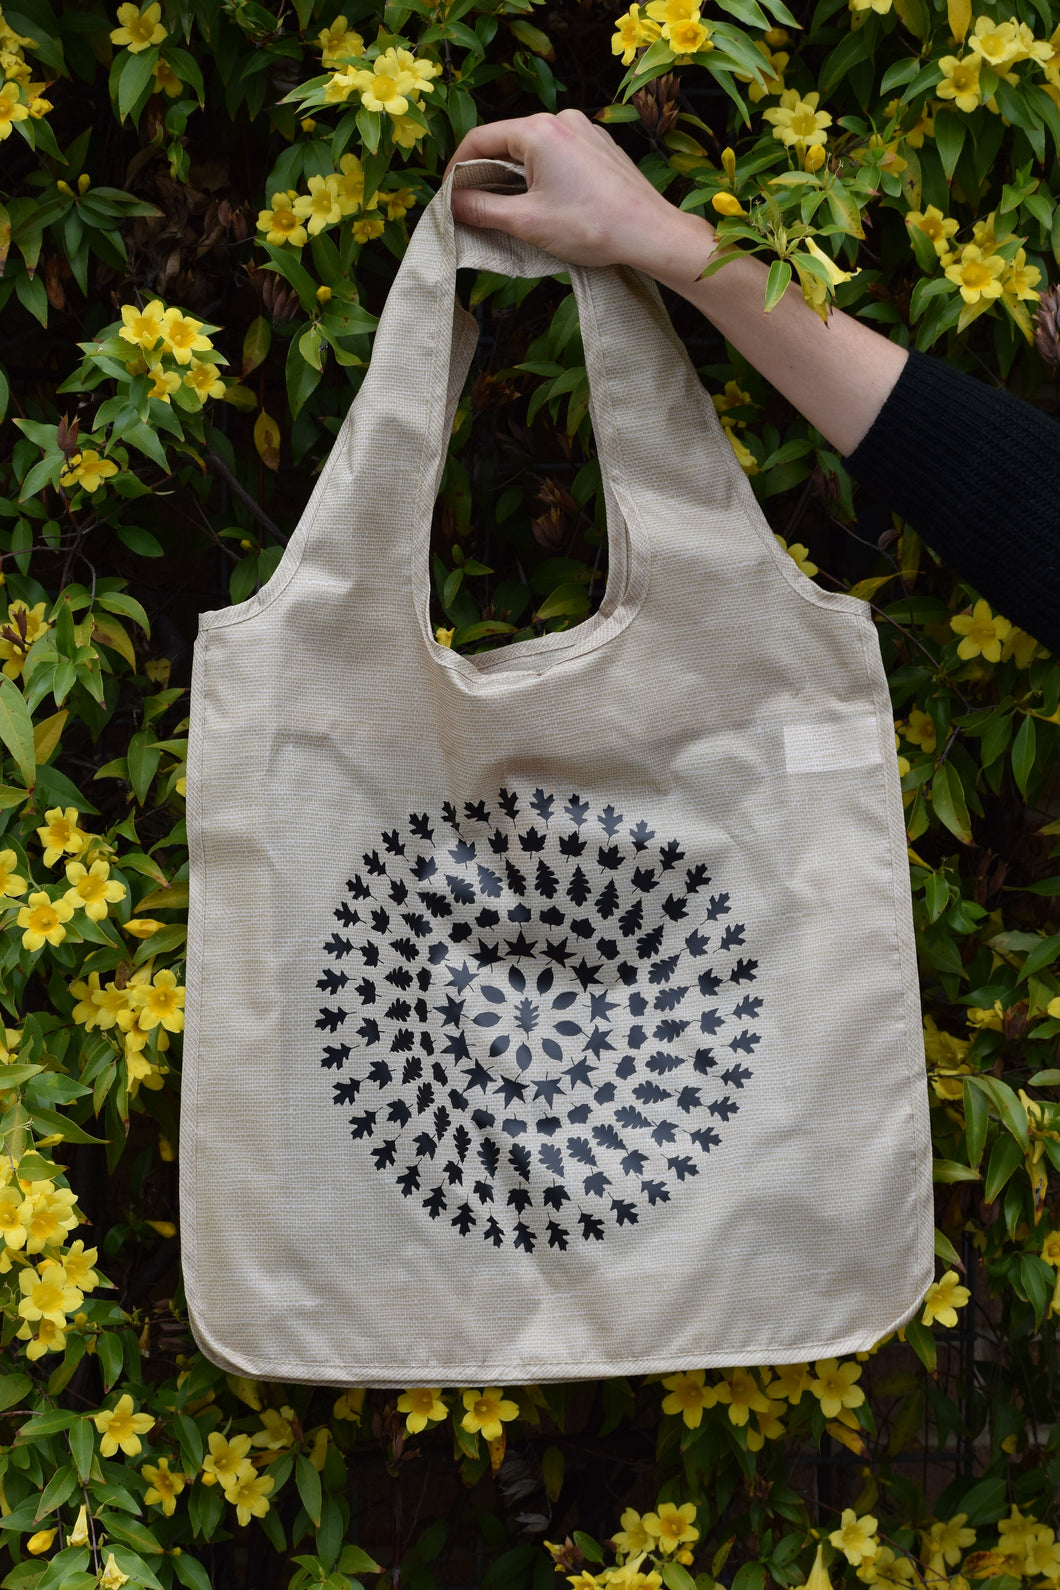 Recycled Tote - Restore, Enhance, Protect